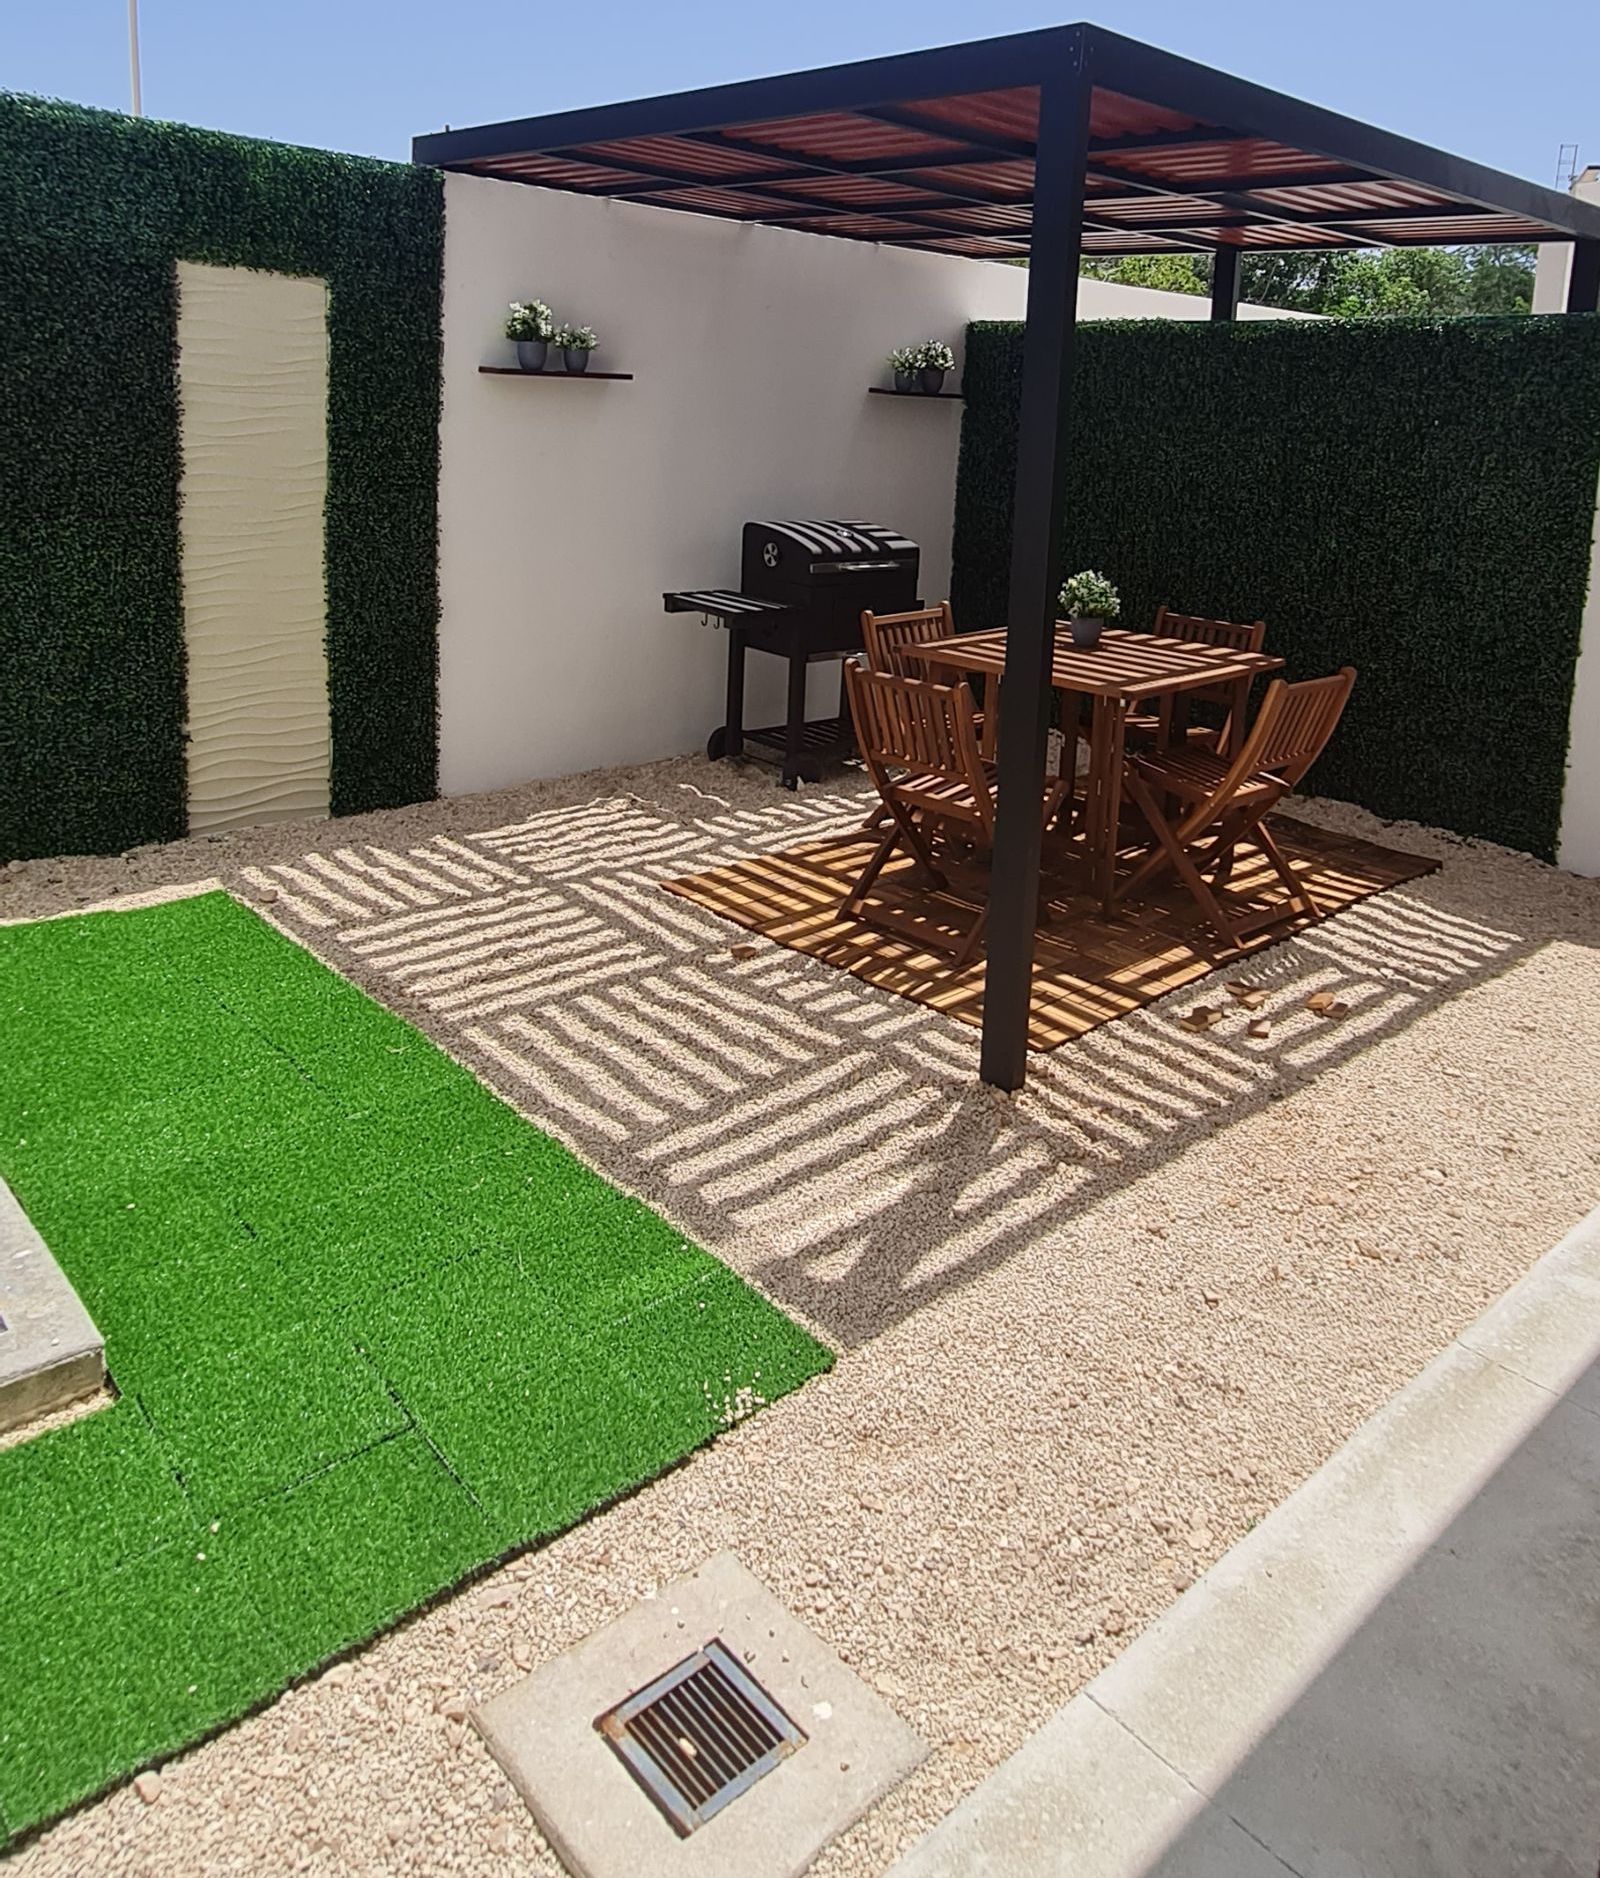 House with solar panels, garden with barbecue, club house with sports fields and pool, playground for children and more in Allergranzza gate